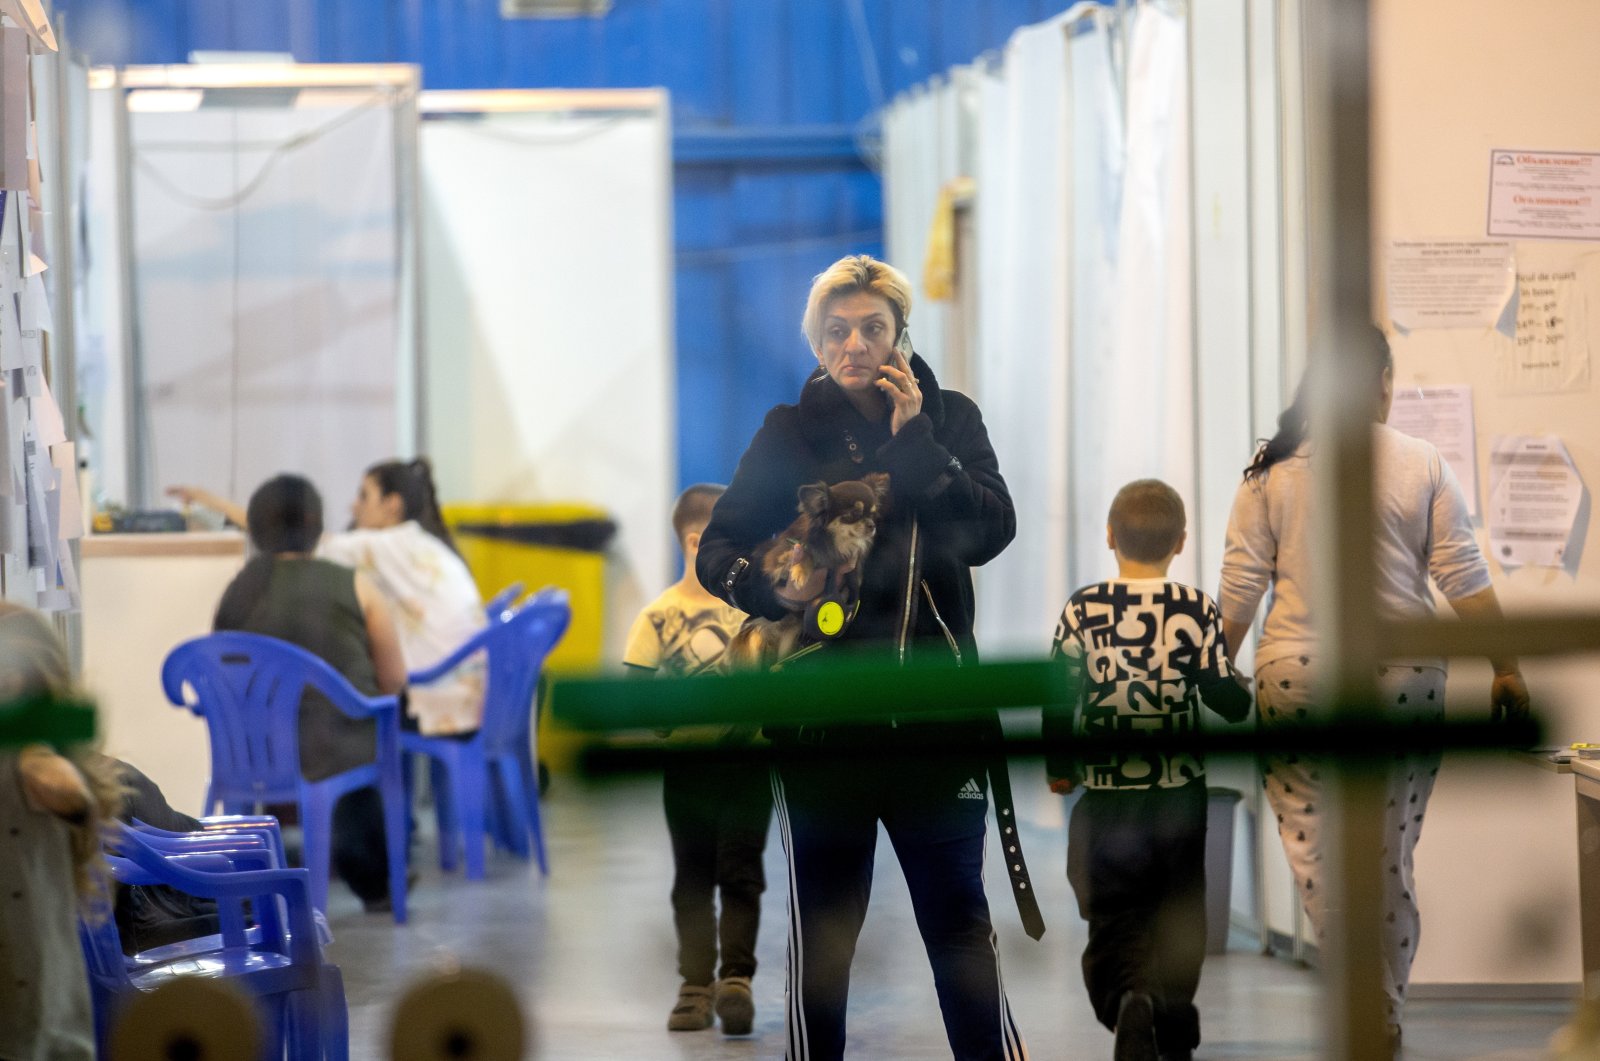 People evacuated from Ukraine rest at the refugee trial camp at MoldExpo national exhibition center in Chisinau, Moldova, March 11, 2022. (EPA Photo)